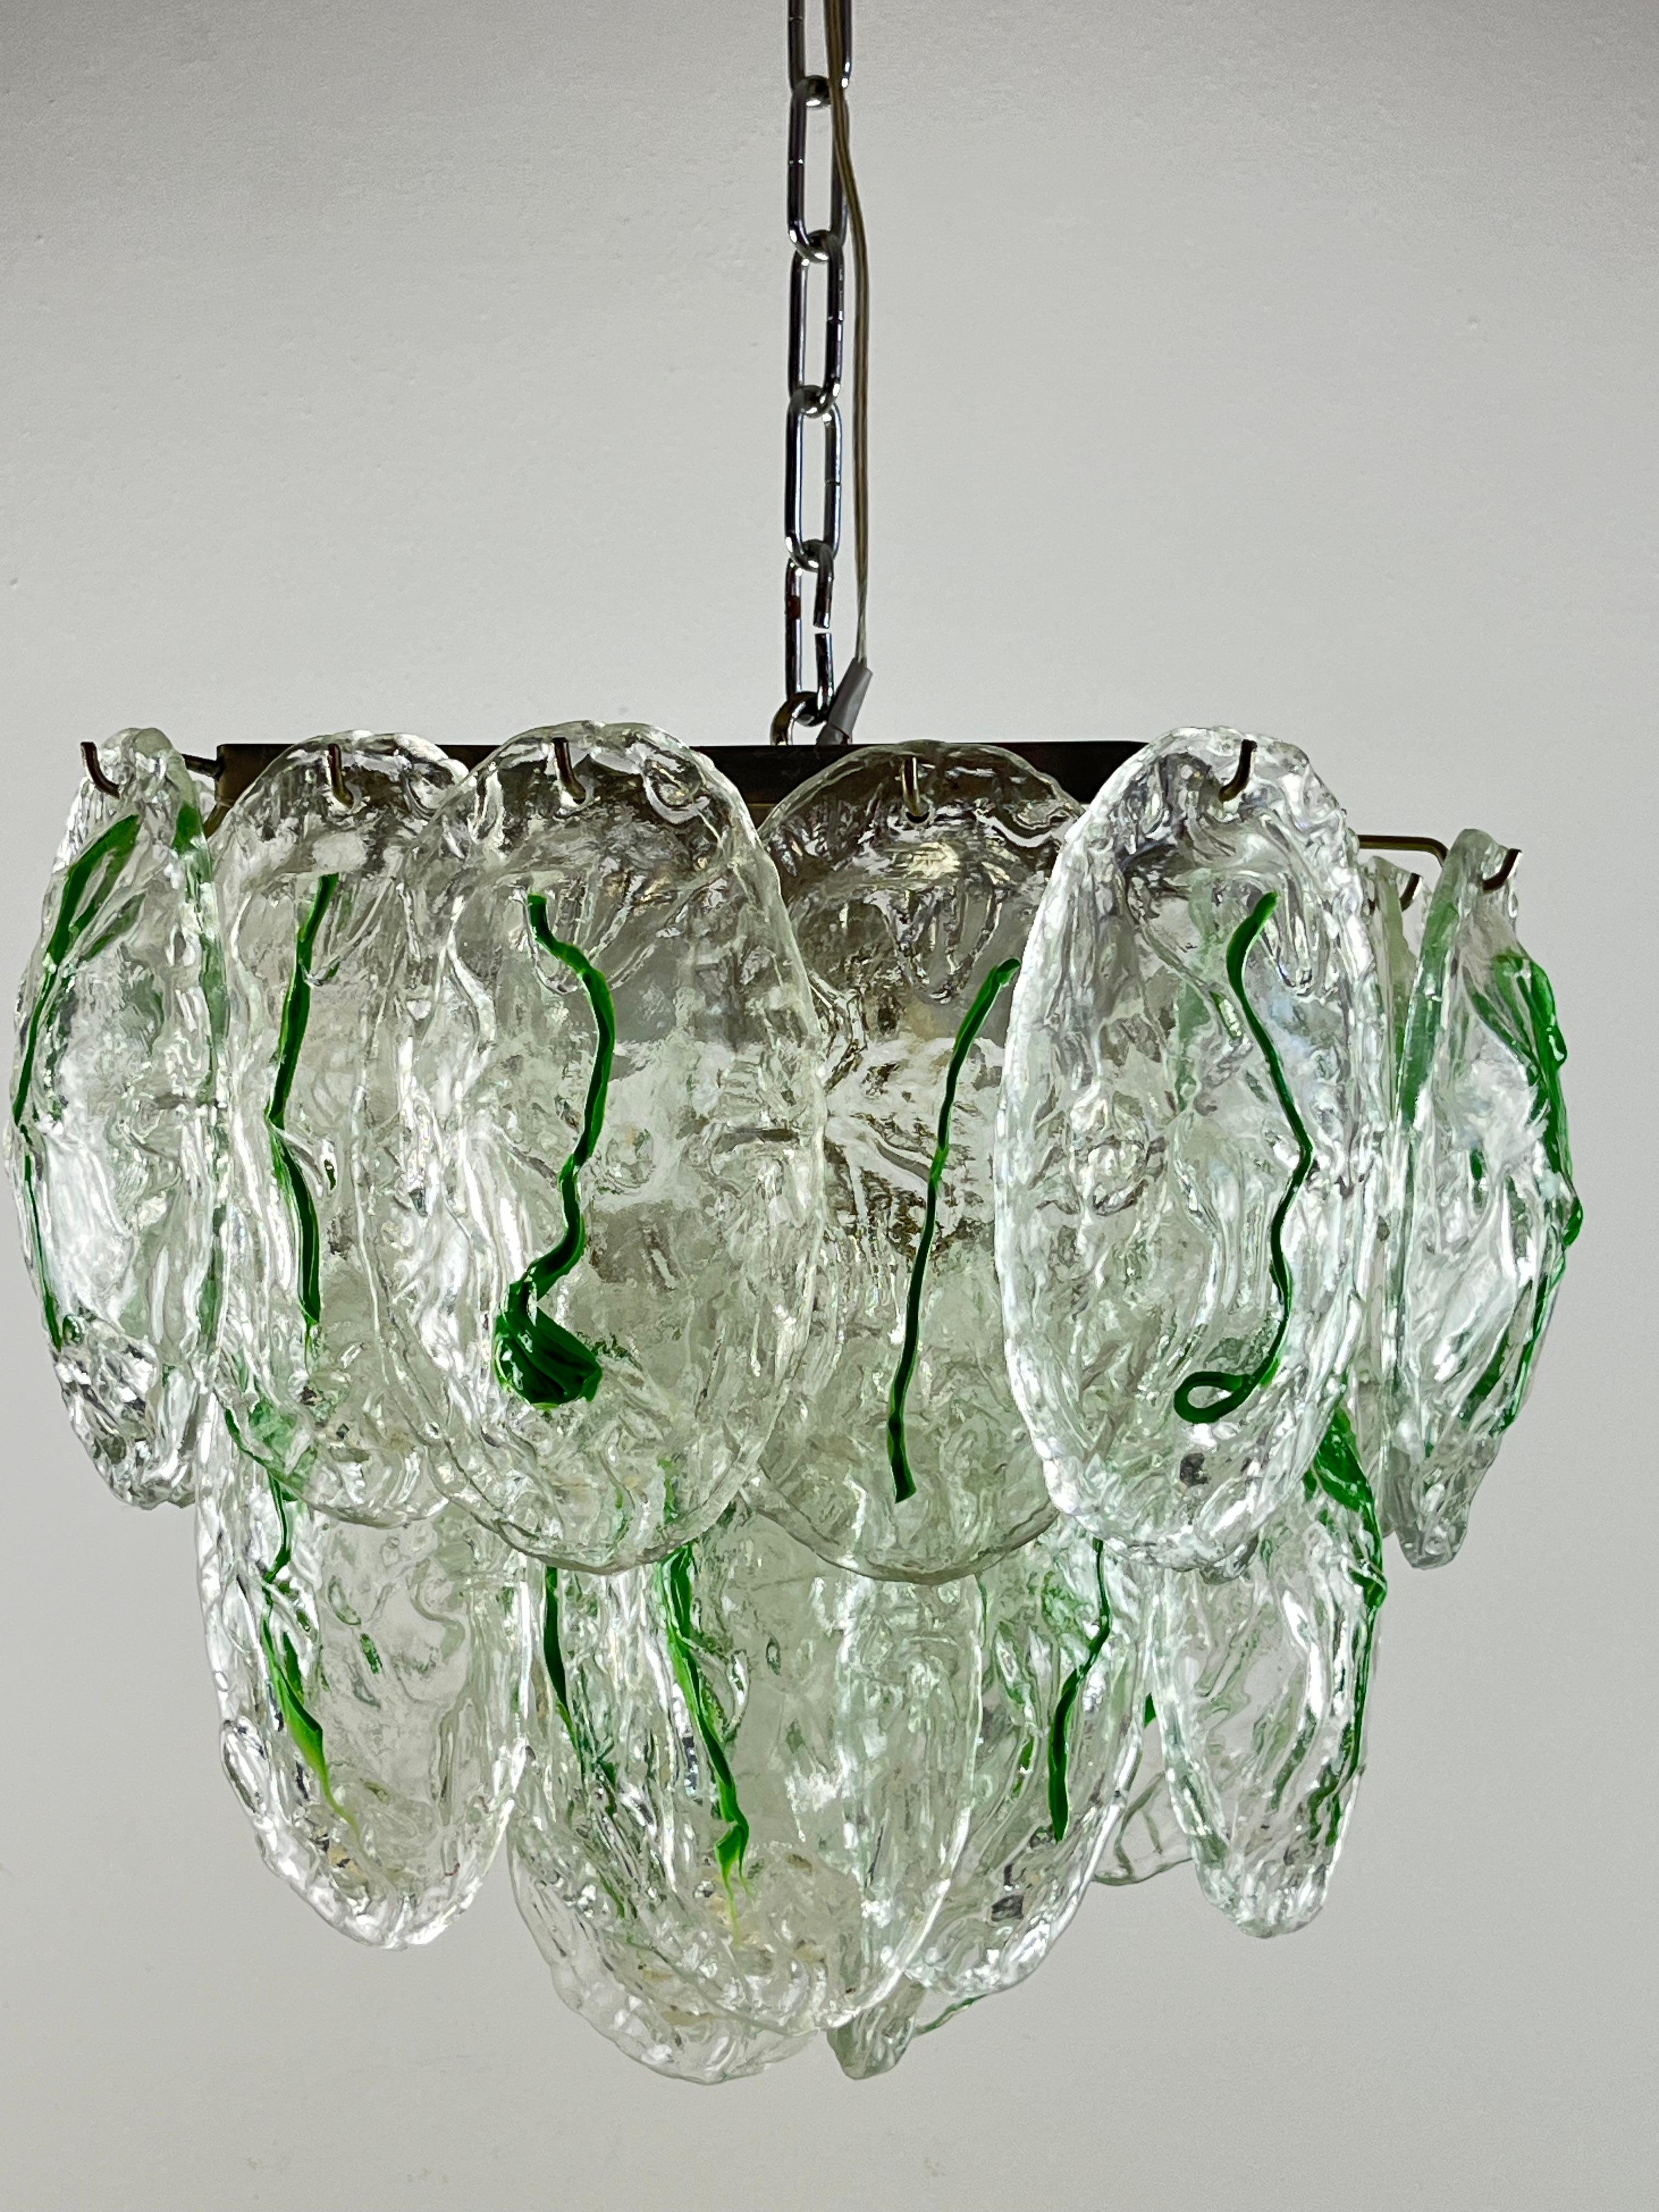 Six-light Murano Glass Chandelier by Vistosi, Italy, 1960s For Sale 6